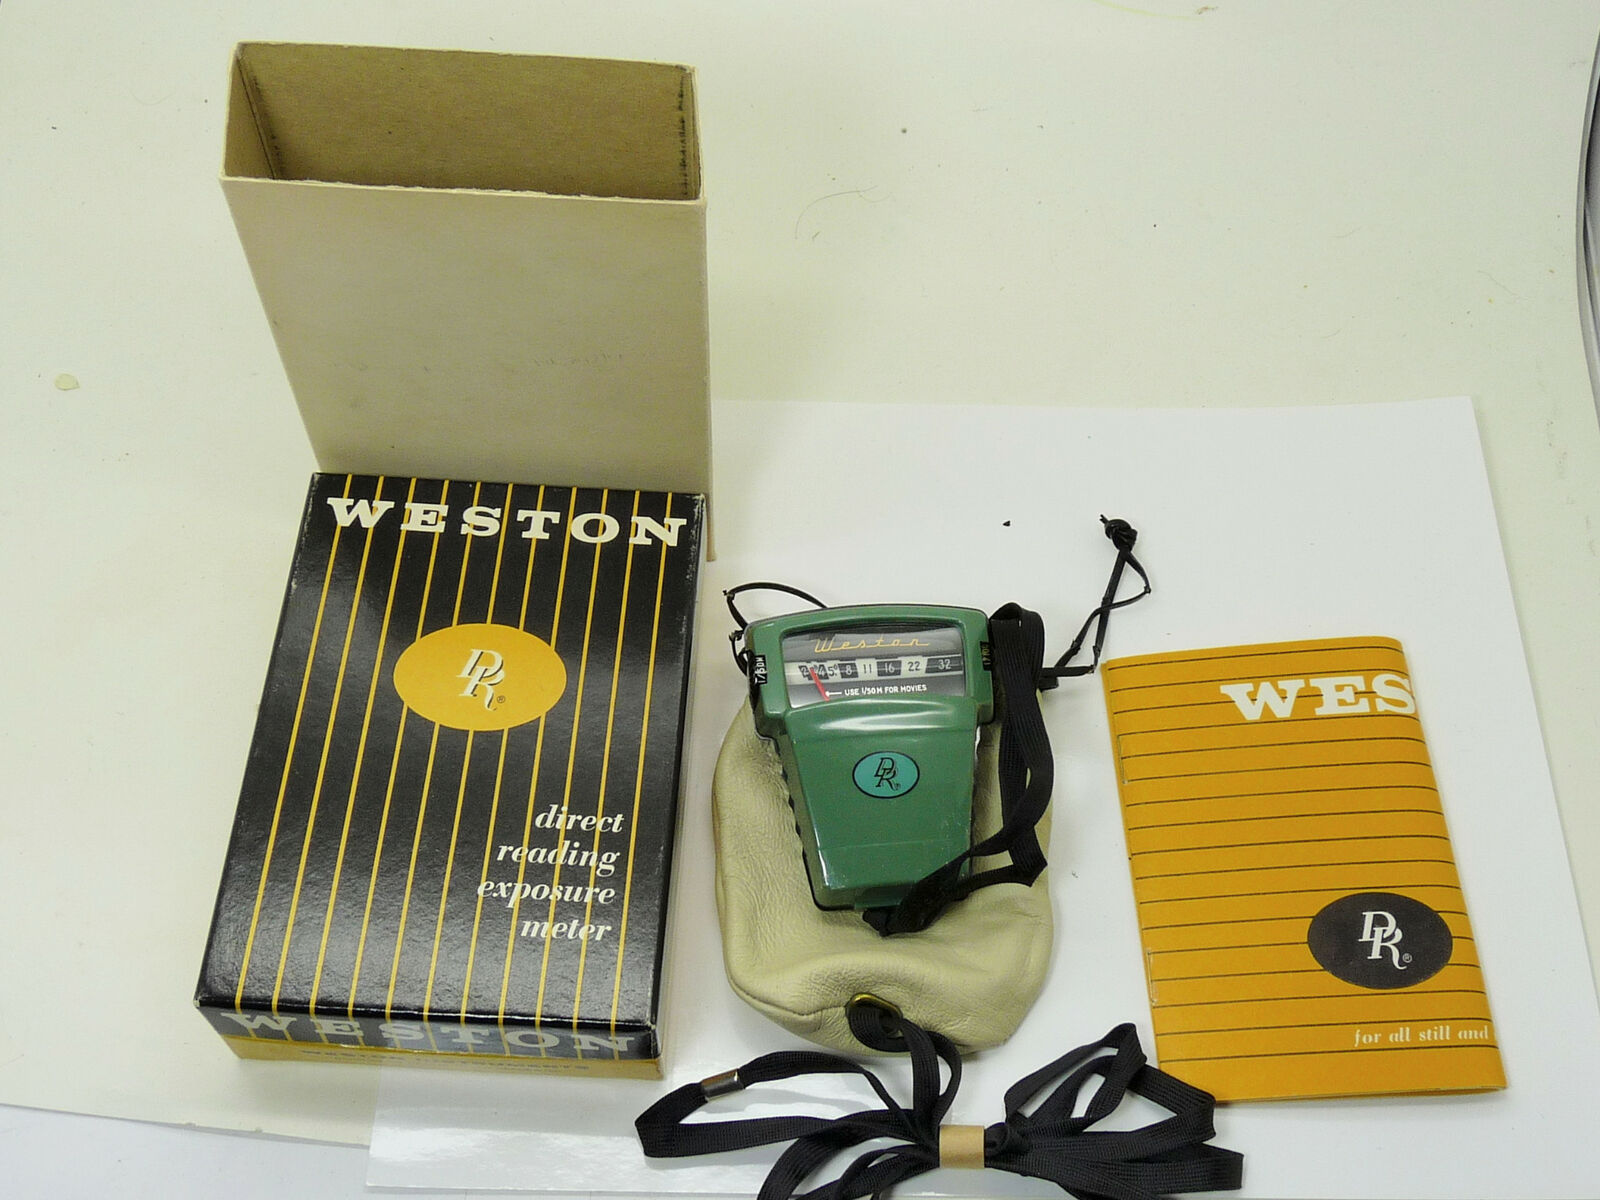 Weston 854 Dr Light Meter Green Mib With Instructions Etc.